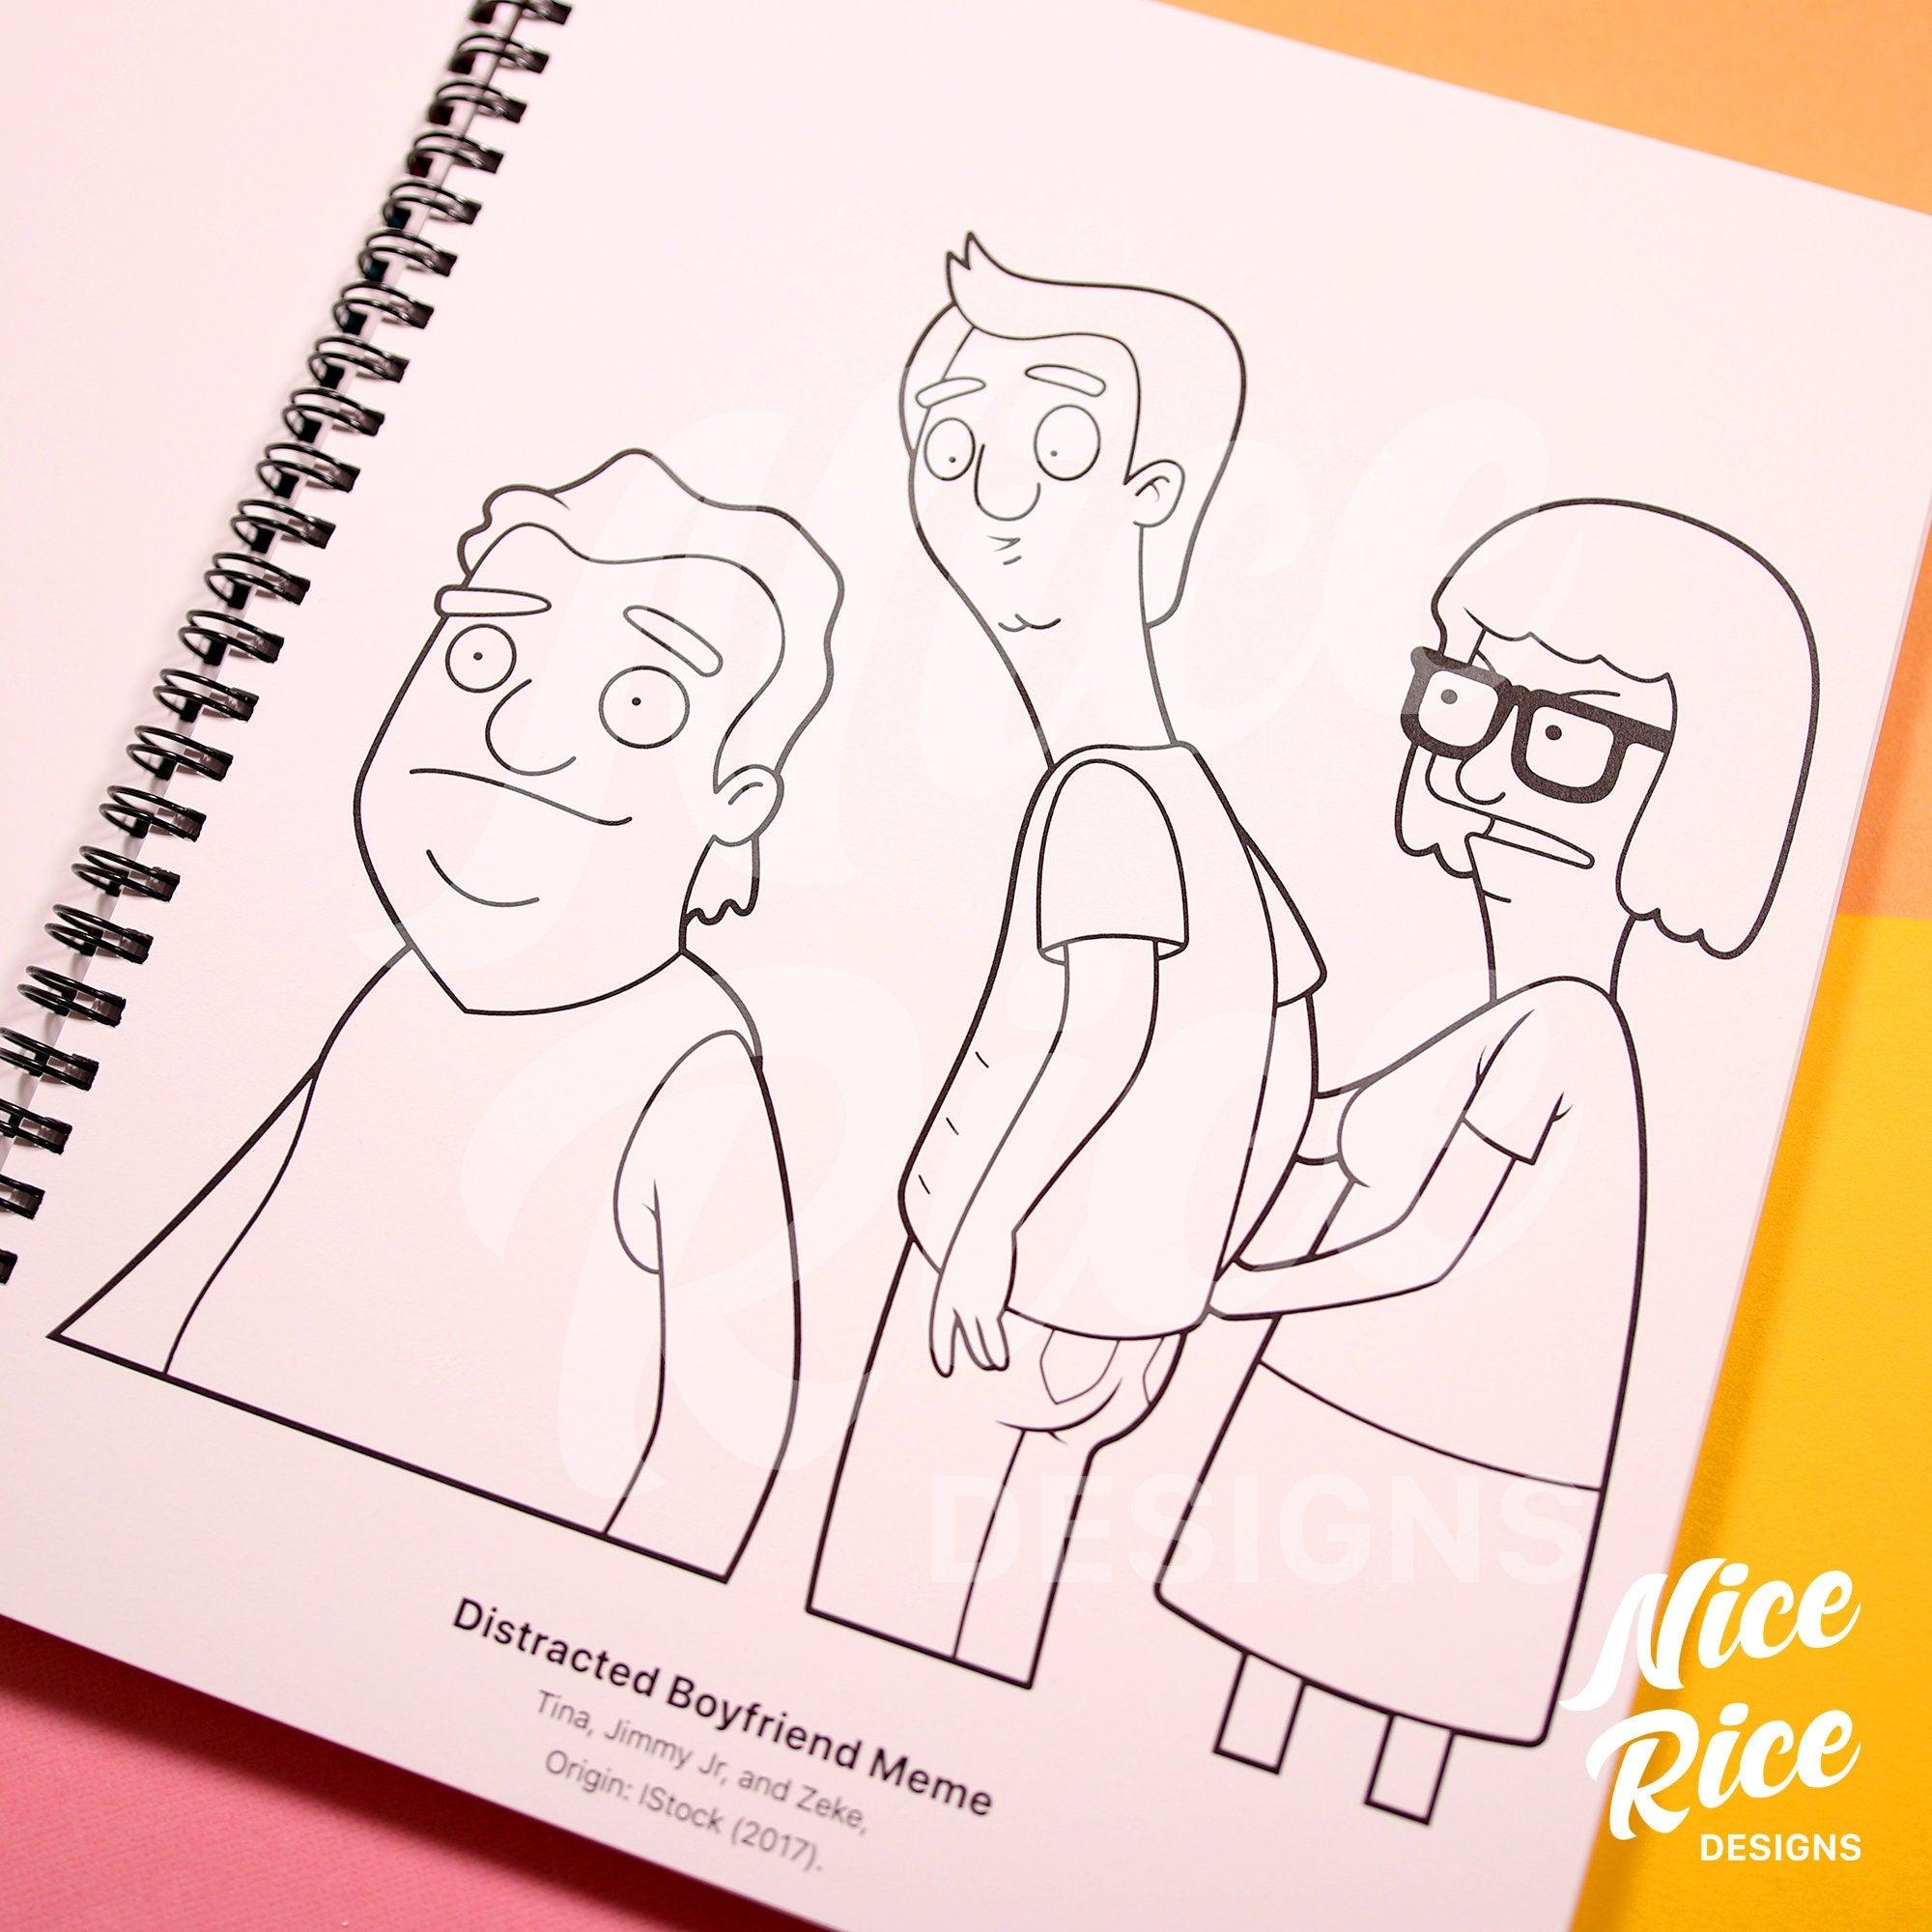 Coloring and Activity Book, Volume Two by Nice Rice Designs